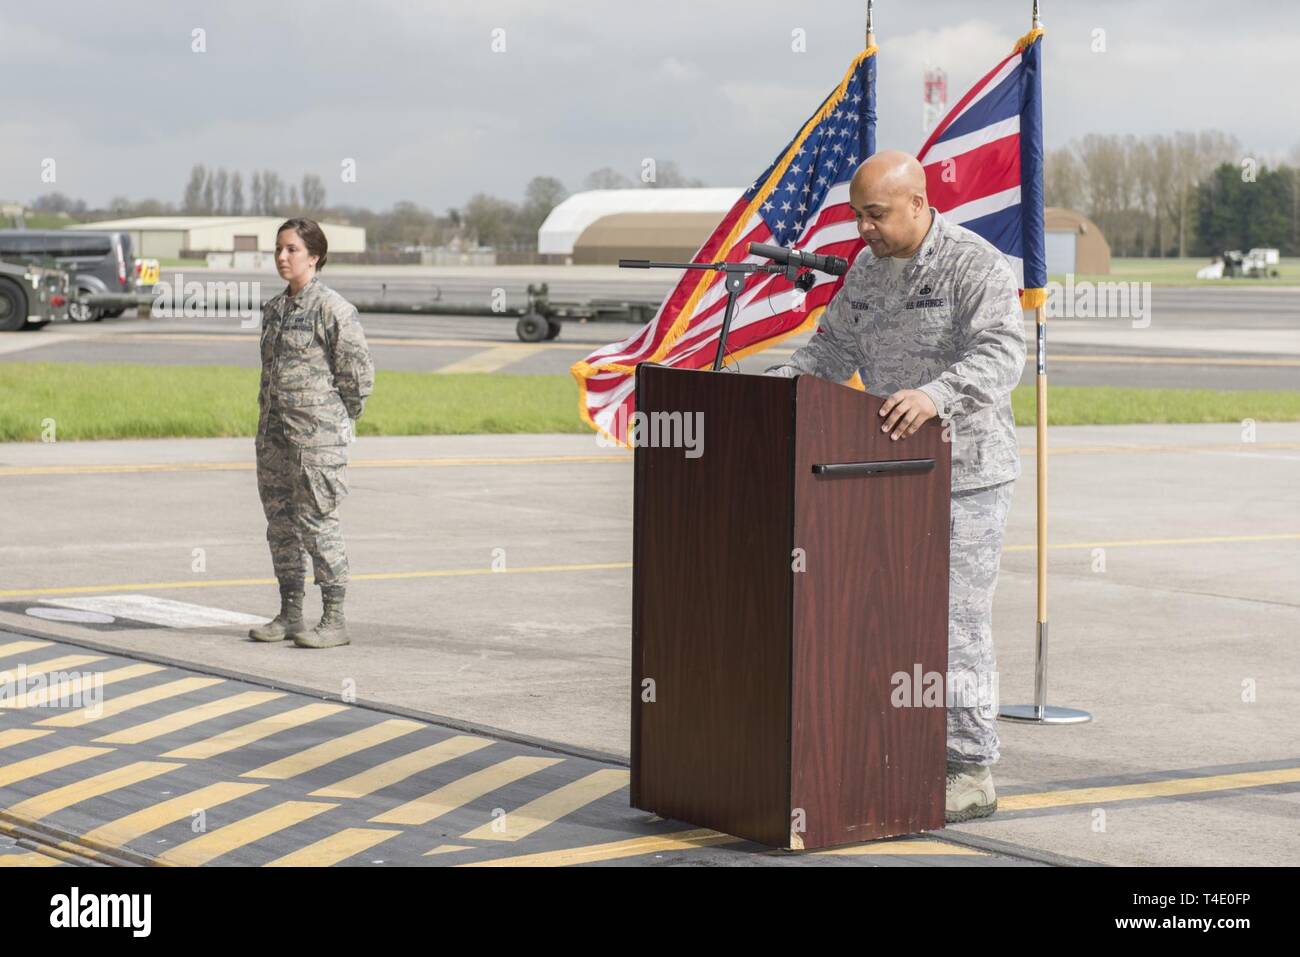 U.S. Air Force Col. Ron Cheatham, 501st Combat Support Wing vice commander, speaks during a press conference at RAF Fairford, March 19, 2019, regarding the Bomber Task Force Europe deployment. The contingent of B-52 aircraft, Airmen and support equipment are currently deployed from the 2nd Bomb Wing, Barksdale Air Force Base, La., to support the BTF. The deployment of strategic bombers to the U.K. helps exercise RAF Fairford as U.S. Air Forces in Europe - Air Forces Africa’s forward-operating location for bombers. The deployment includes joint and allied training to enhance interoperability an Stock Photo